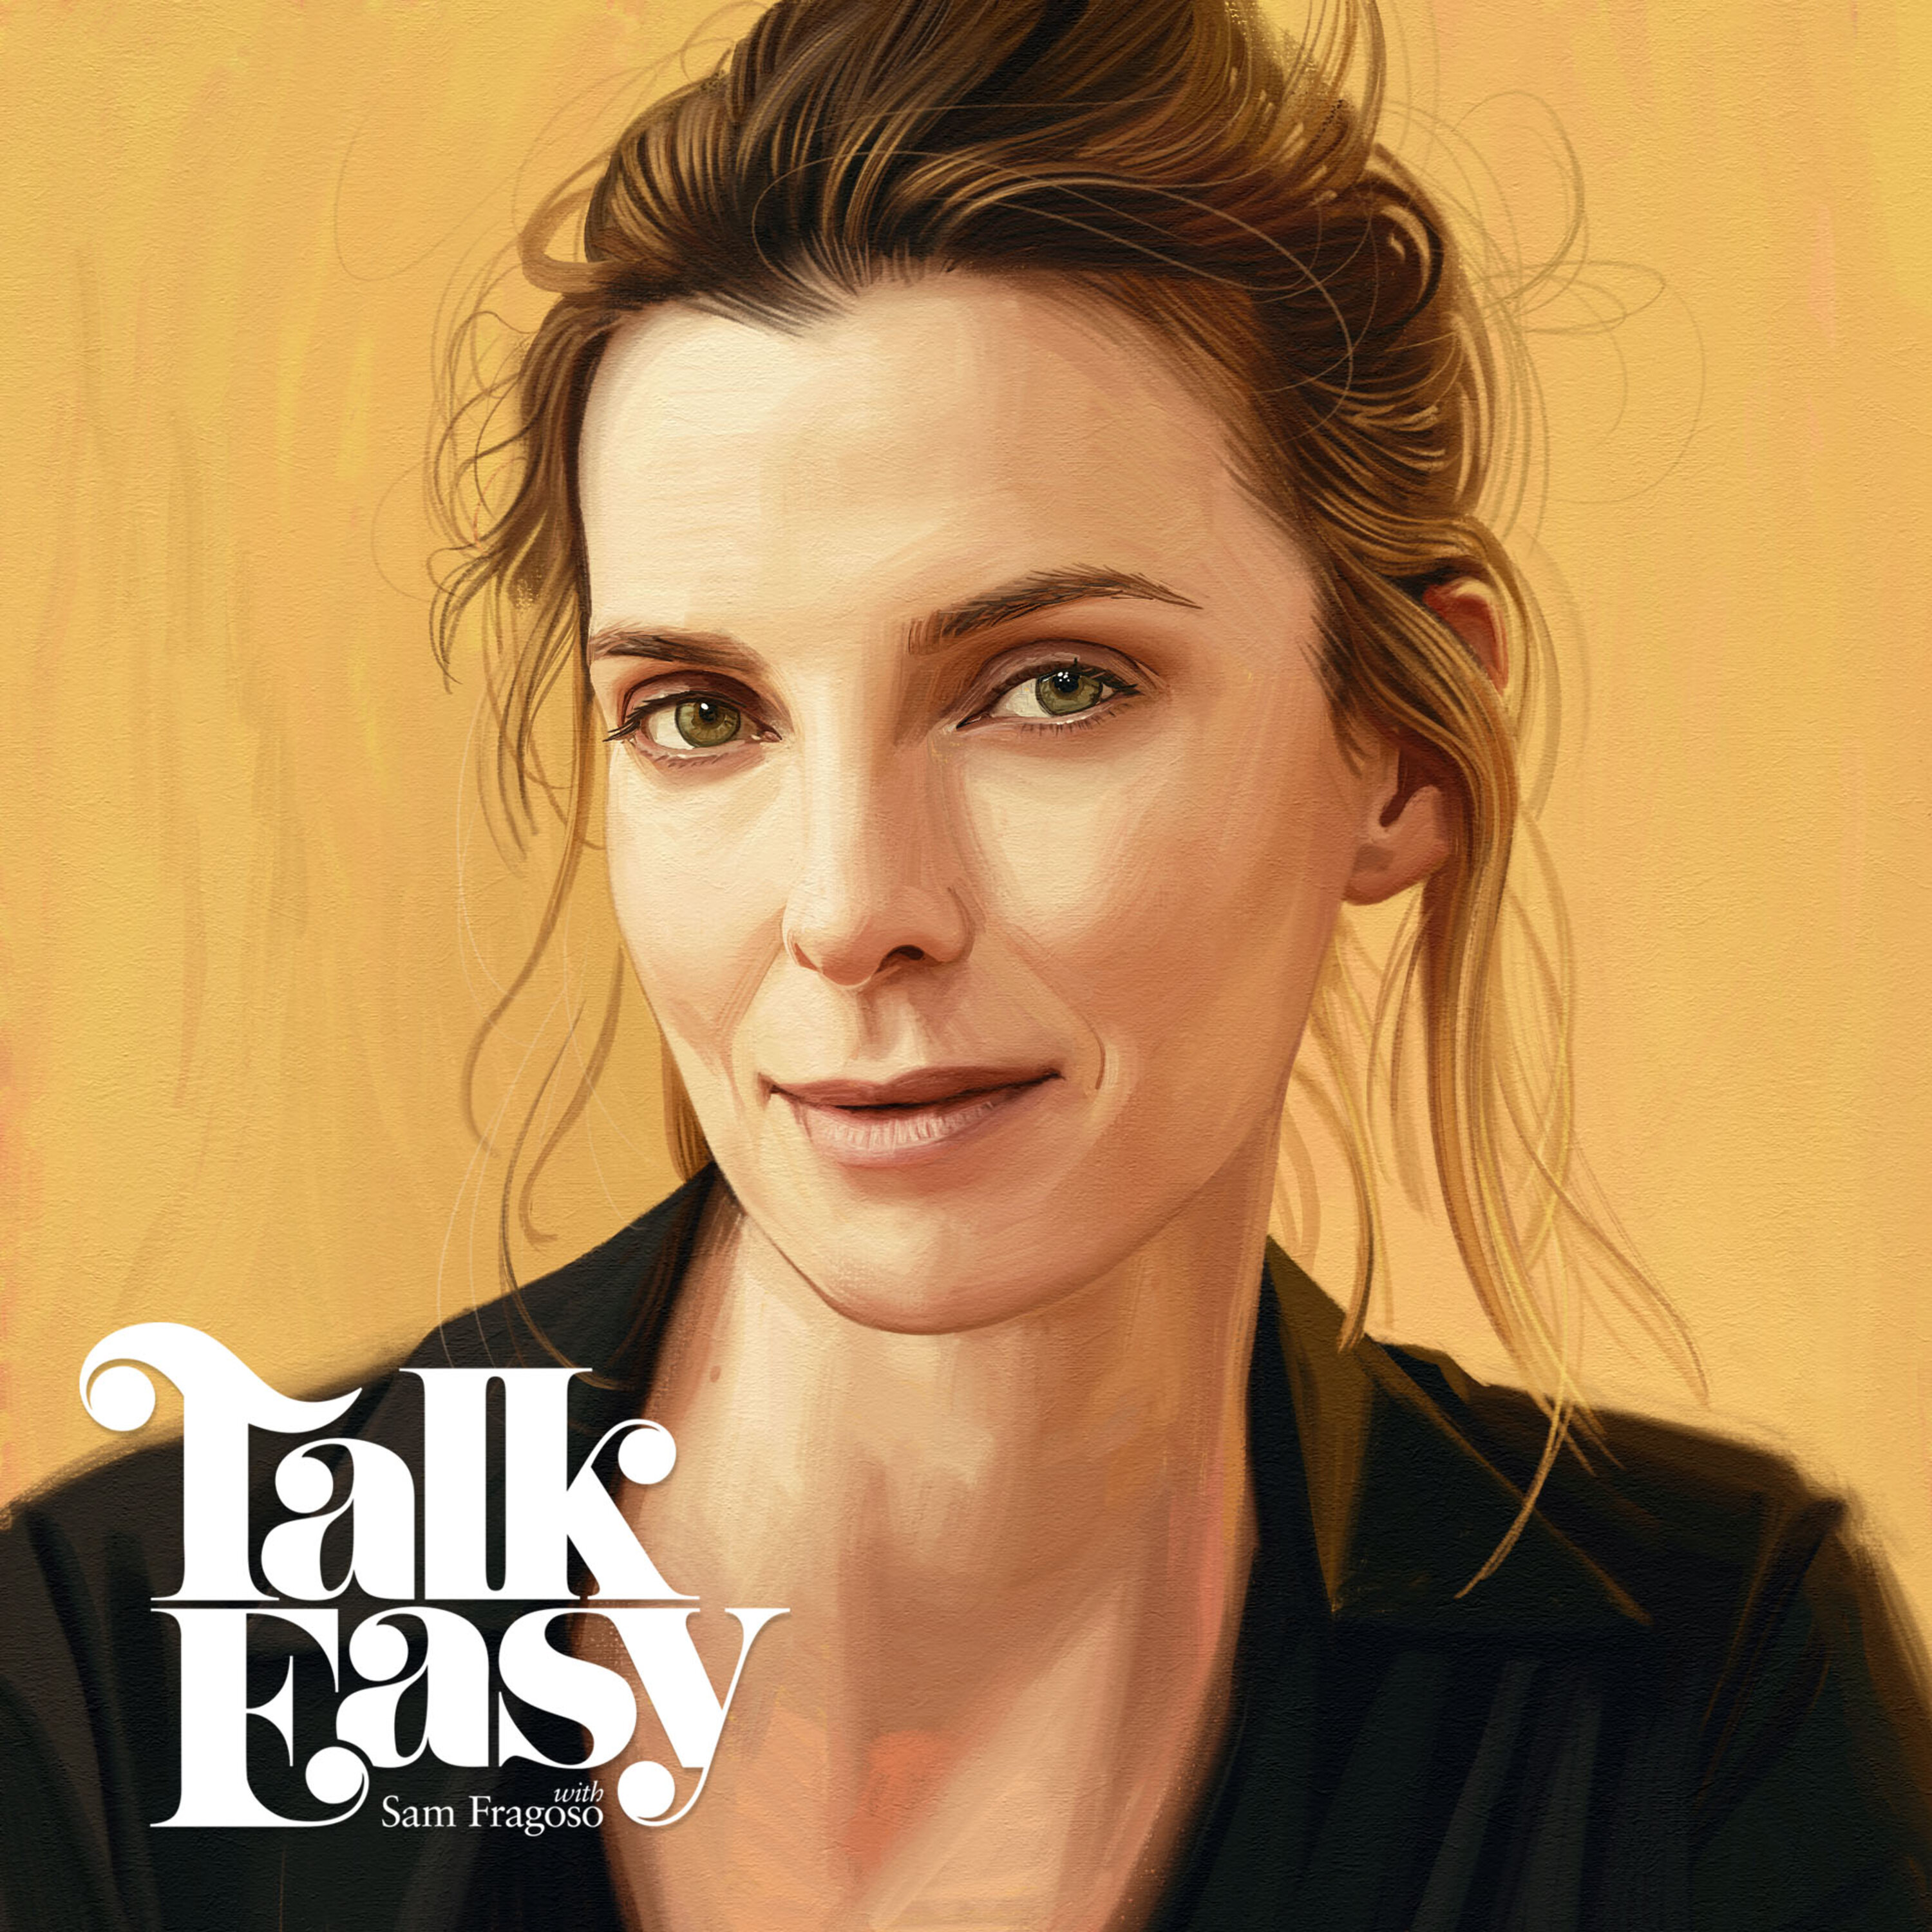 All the Women in Actor Betty Gilpin’s Brain